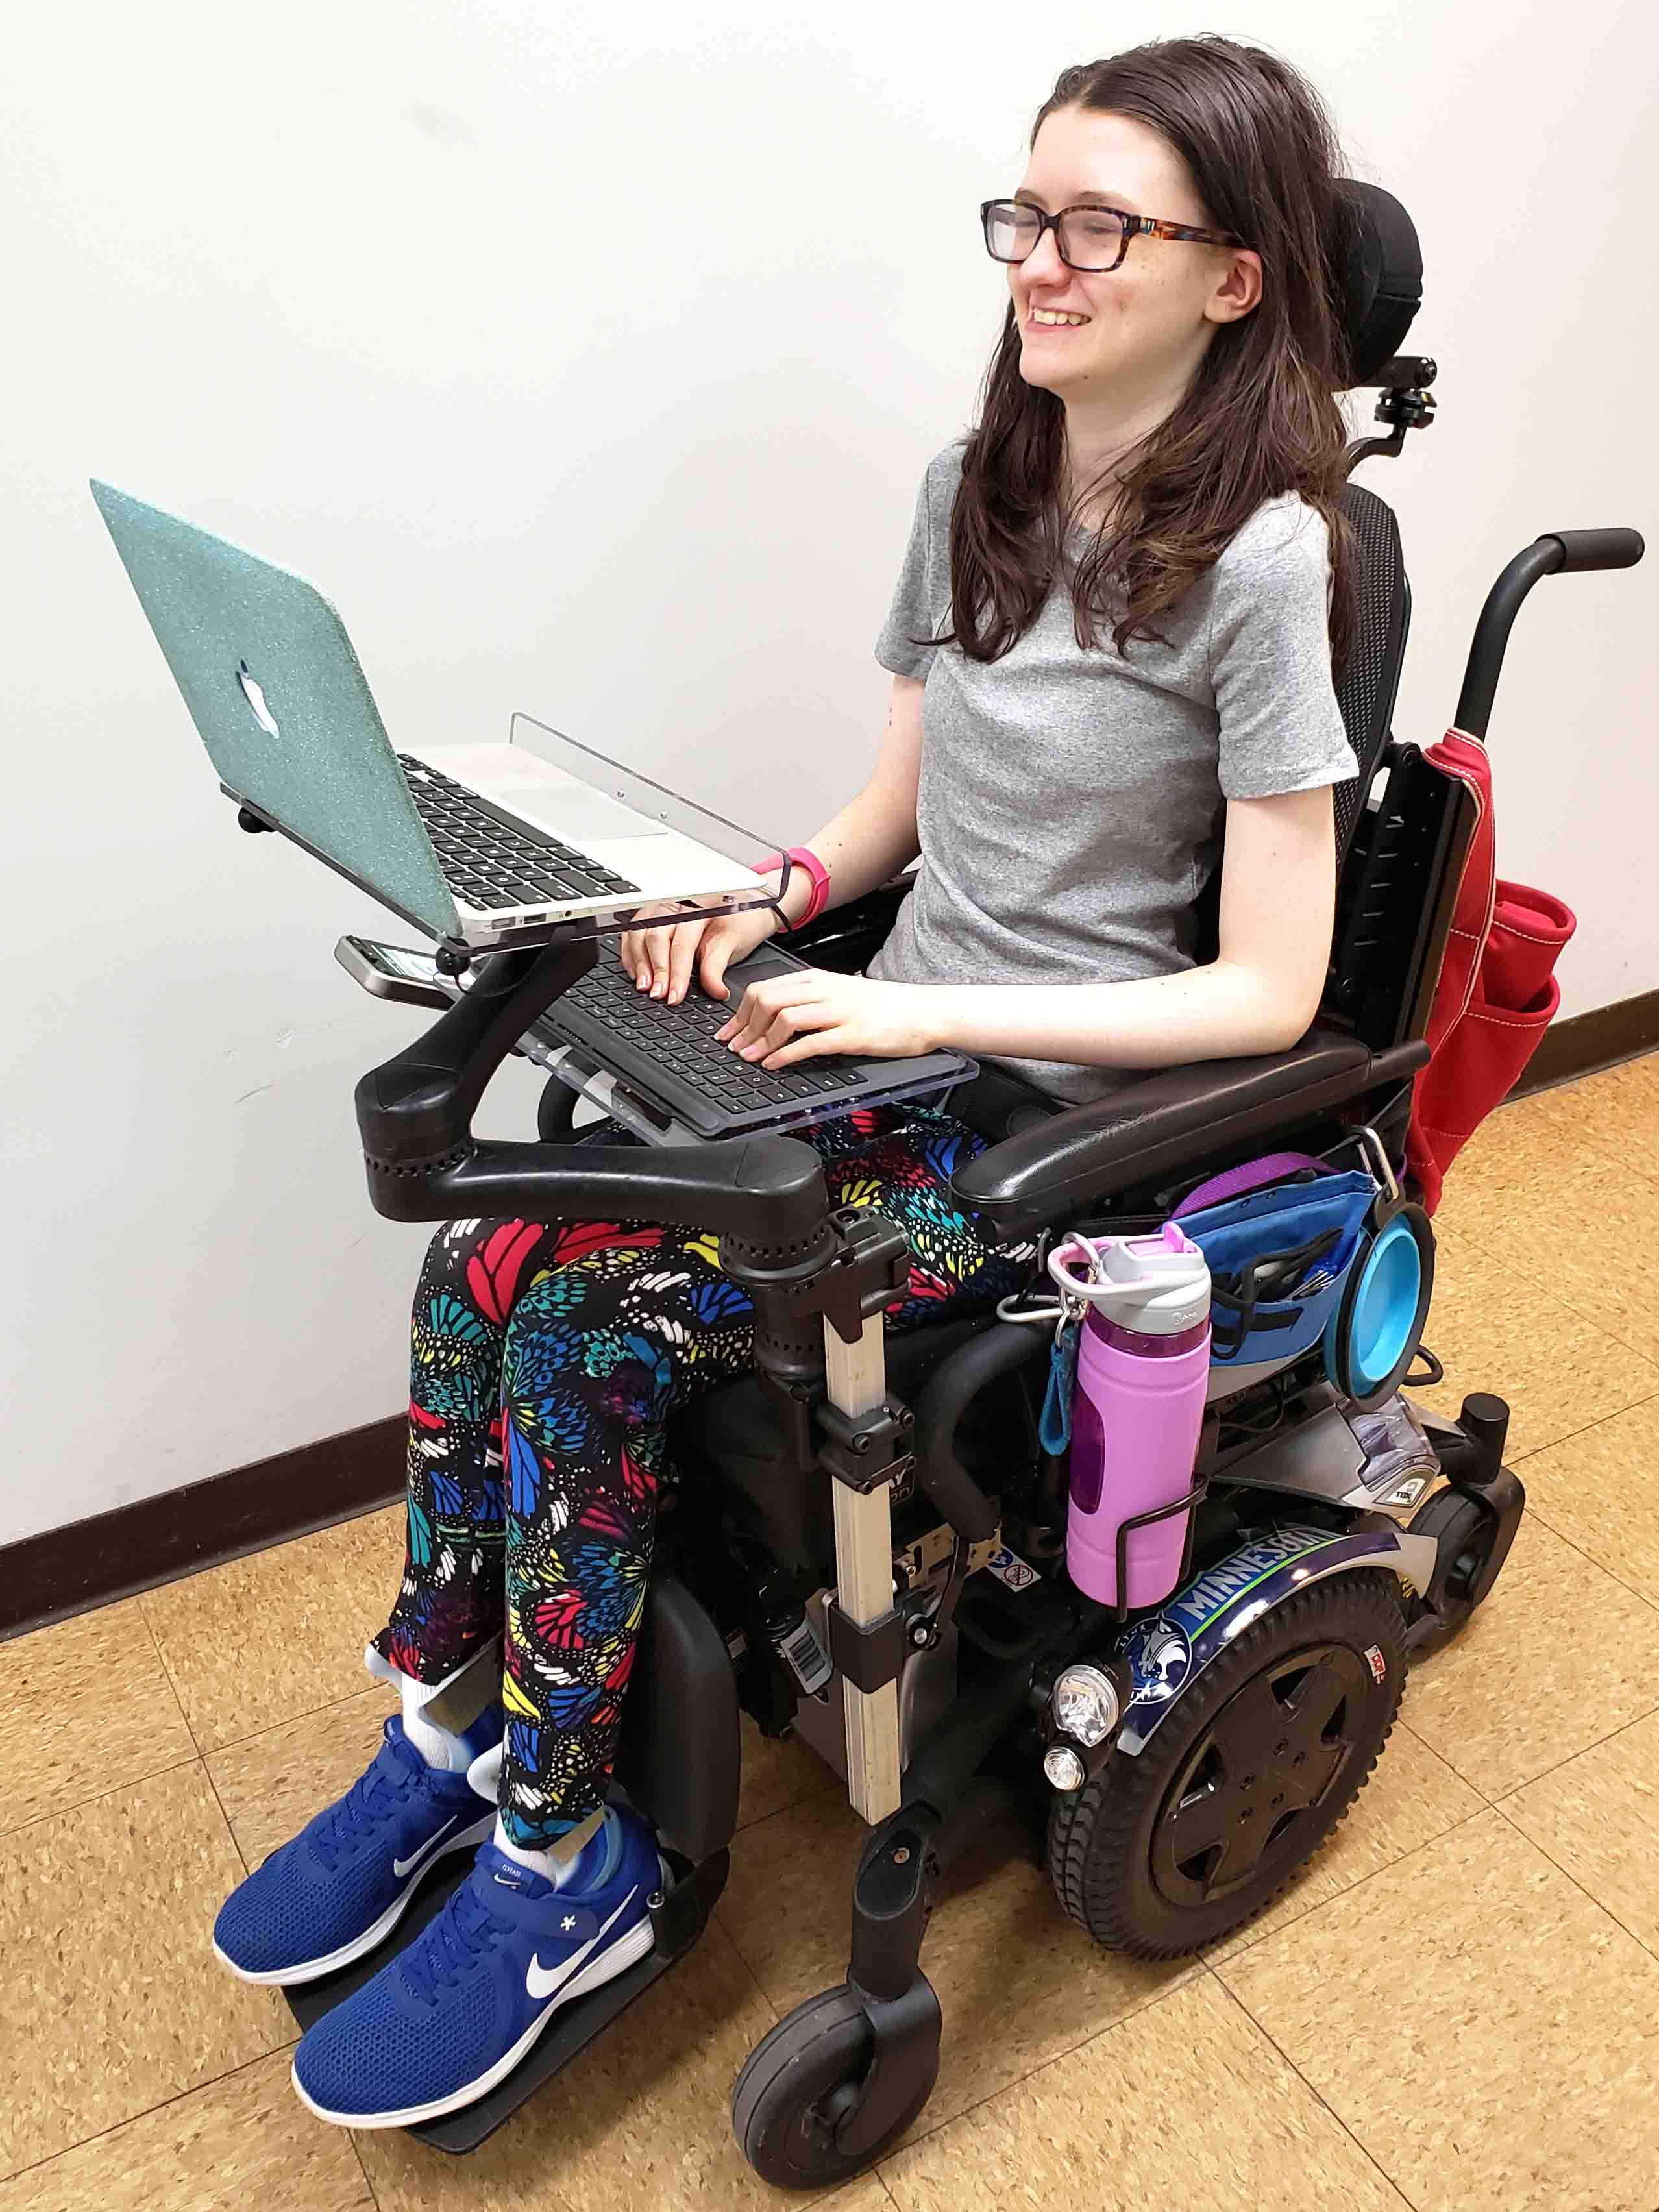 Wheelchair Mount for Laptop Computer and Keyboard